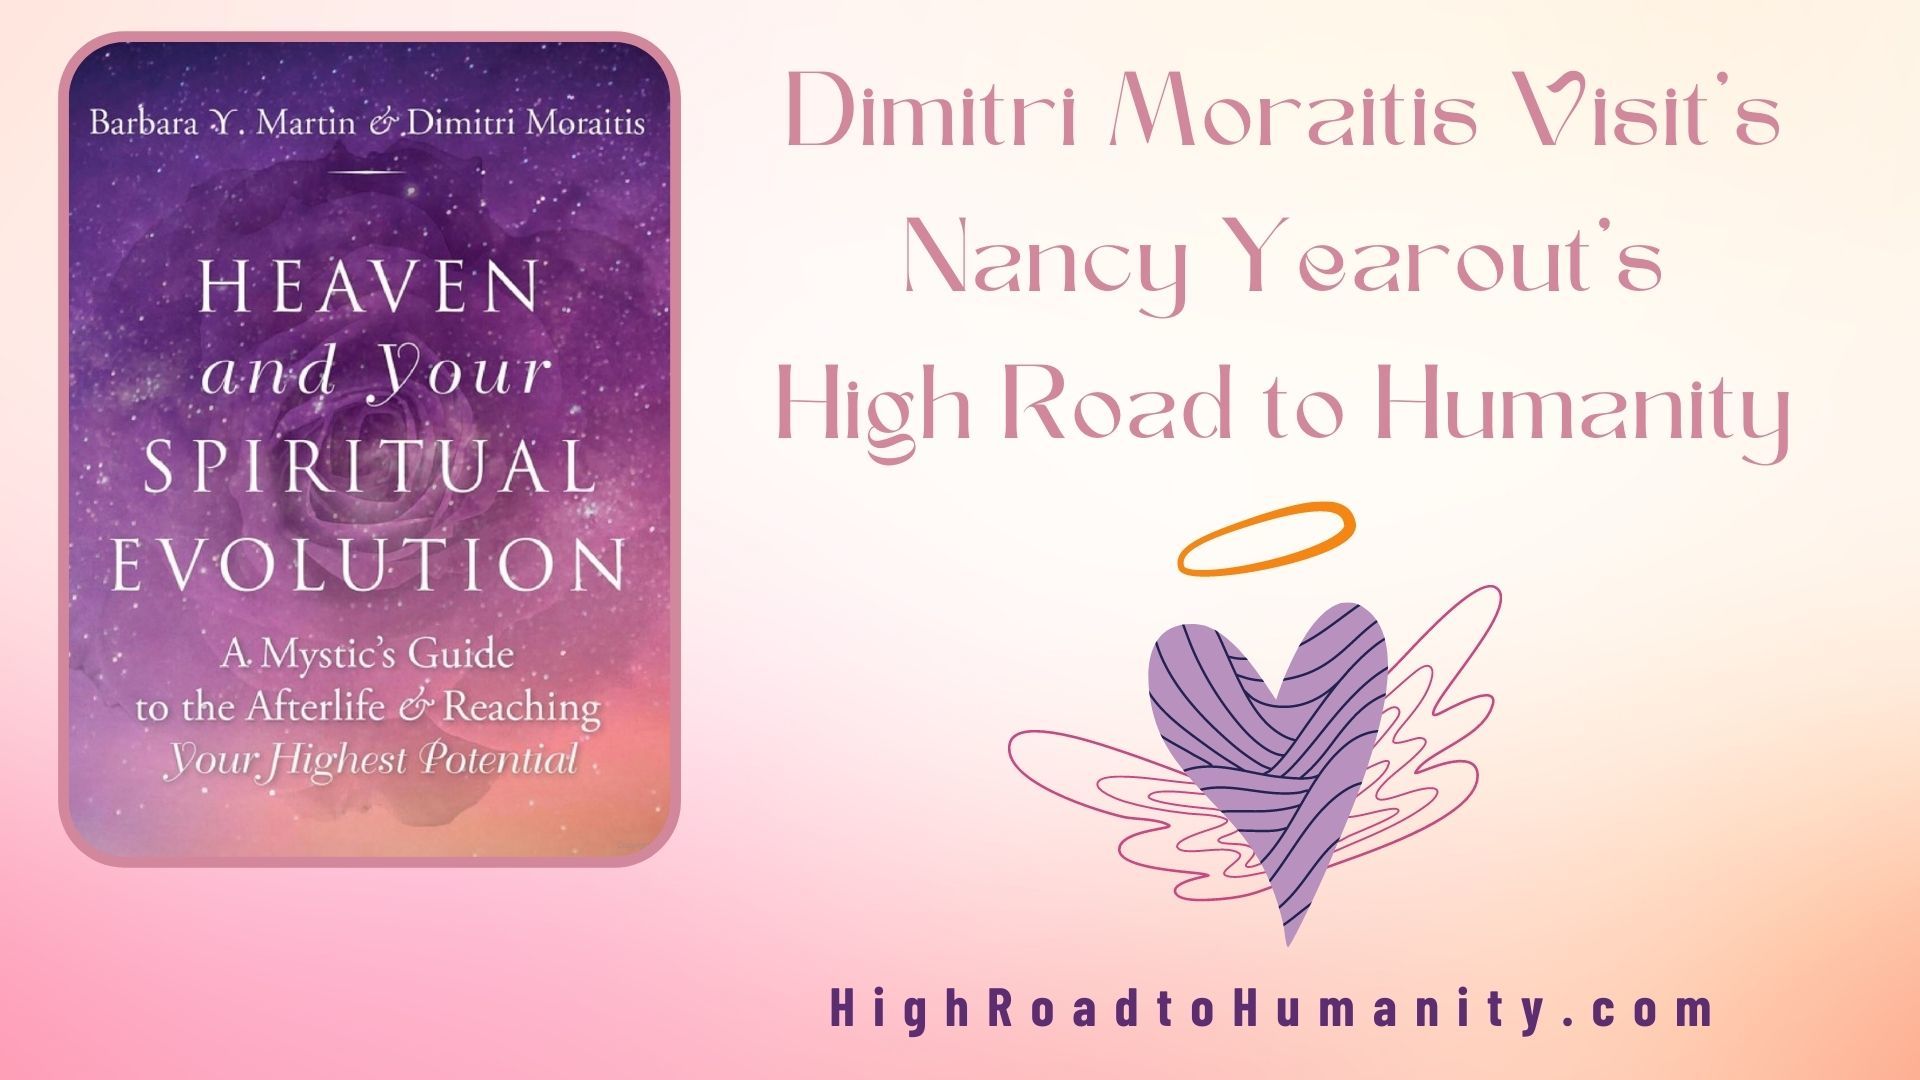 Heaven and Your Spiritual Evolution with Dimitri Moraitis on Nancy Yearout's High Road to Humanity